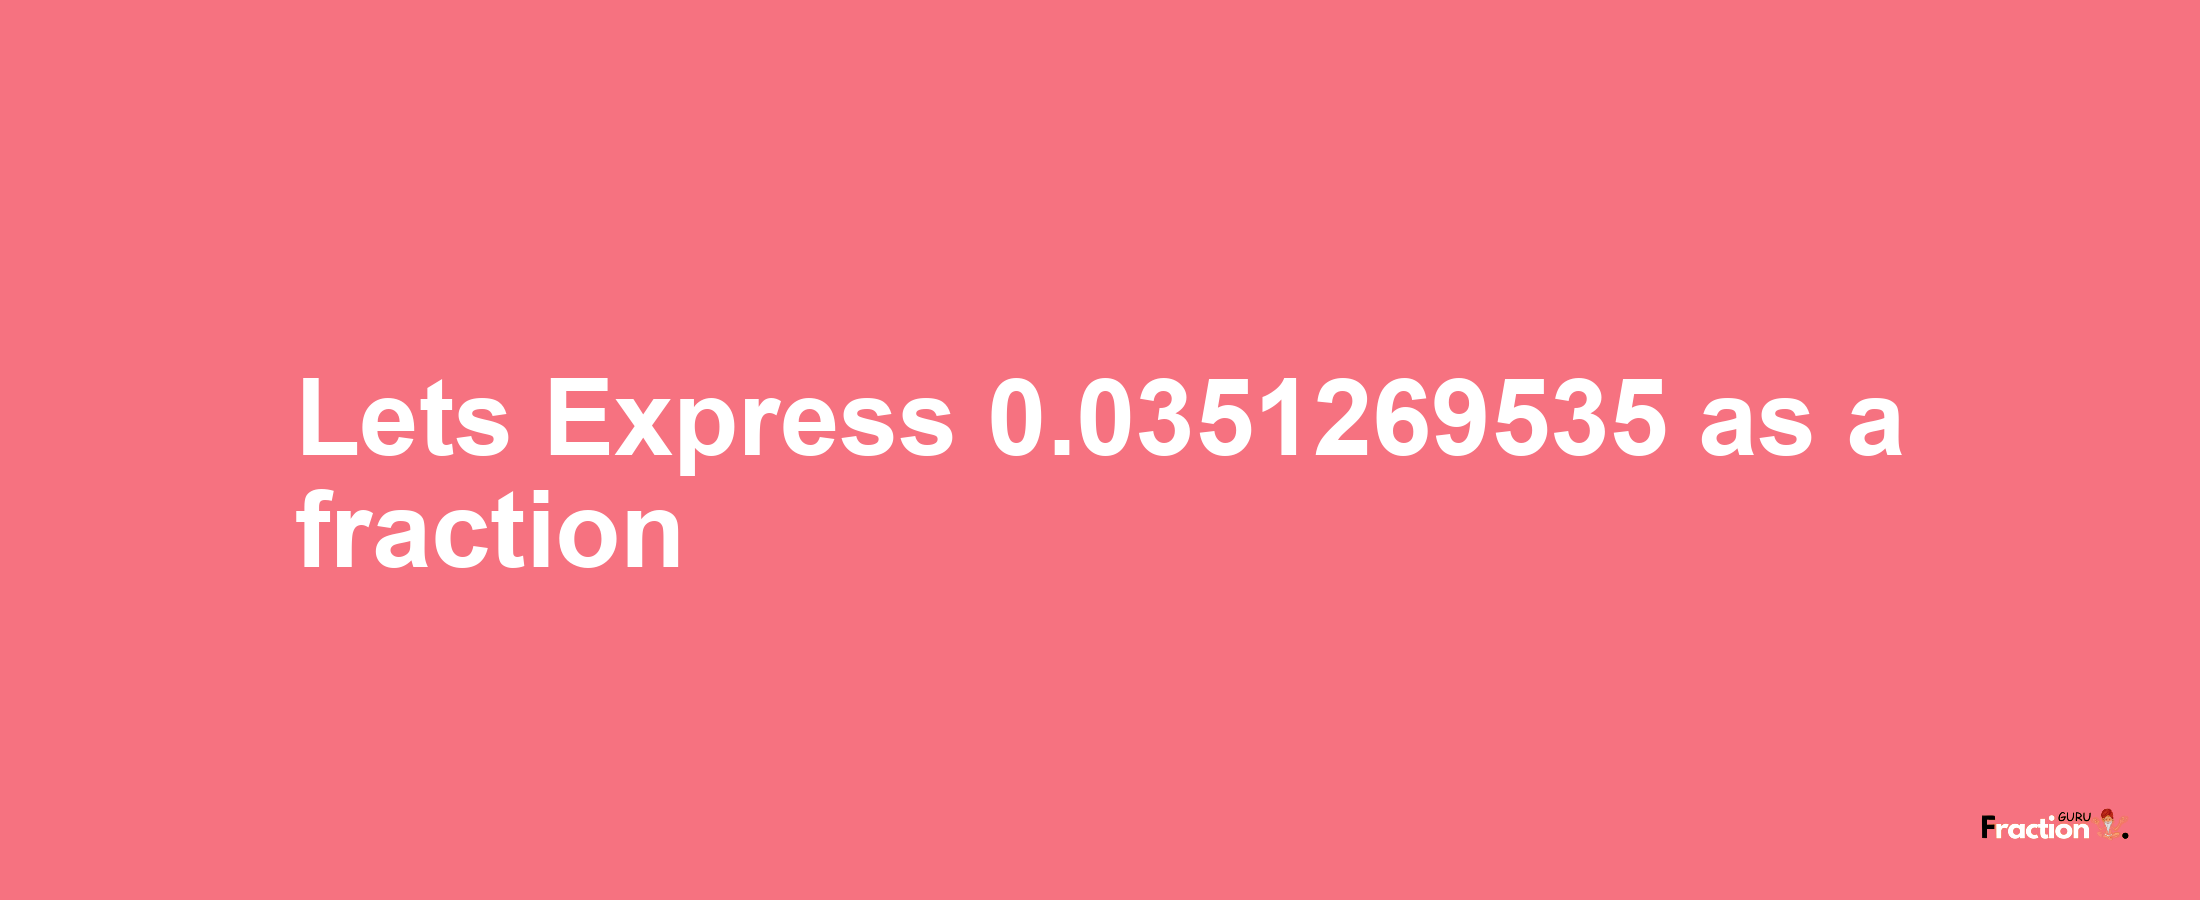 Lets Express 0.0351269535 as afraction